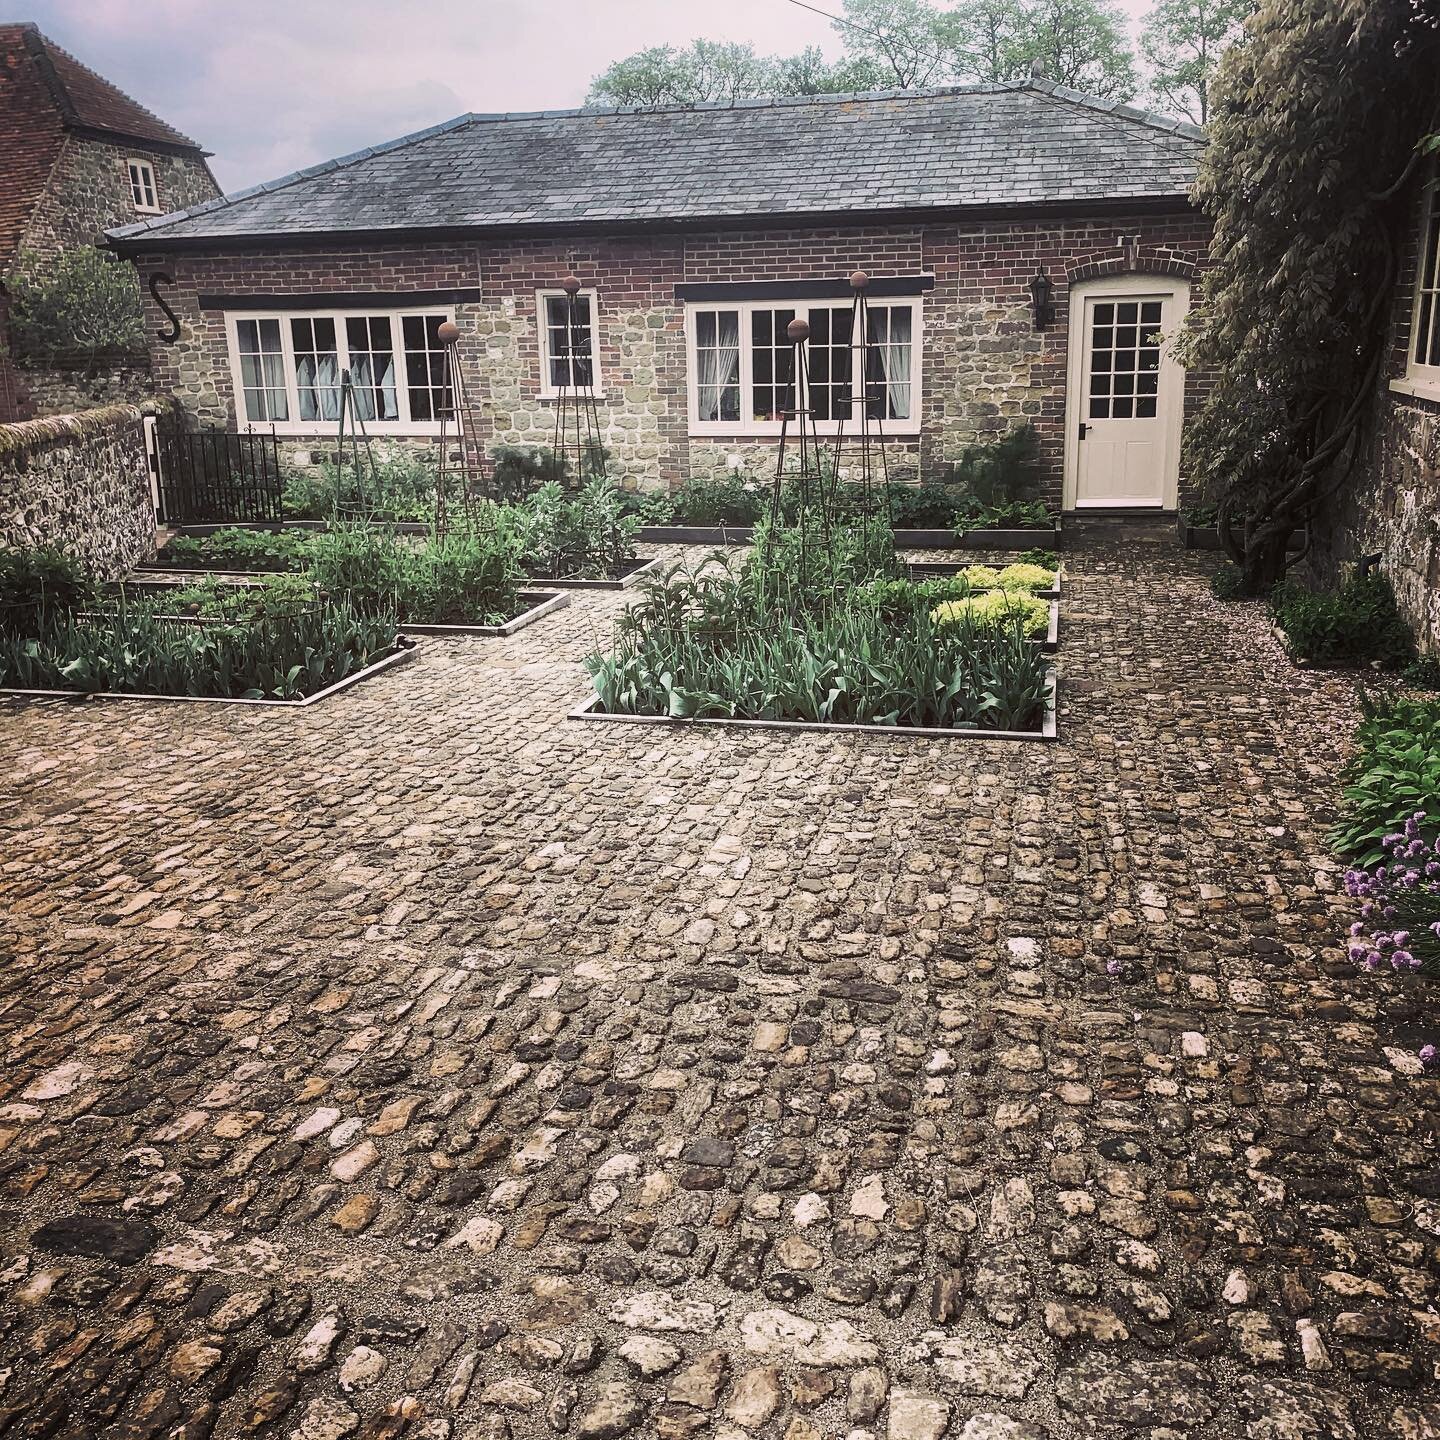 Great to see the cobbled courtyard we did last year settling in. One of my favourite projects in recent years #reclaimed #reclaimedstone #cobblestones #landscapedesign #landscapeconstruction #landscape #courtyardgarden #stonemasonry #raisedbeds #sore